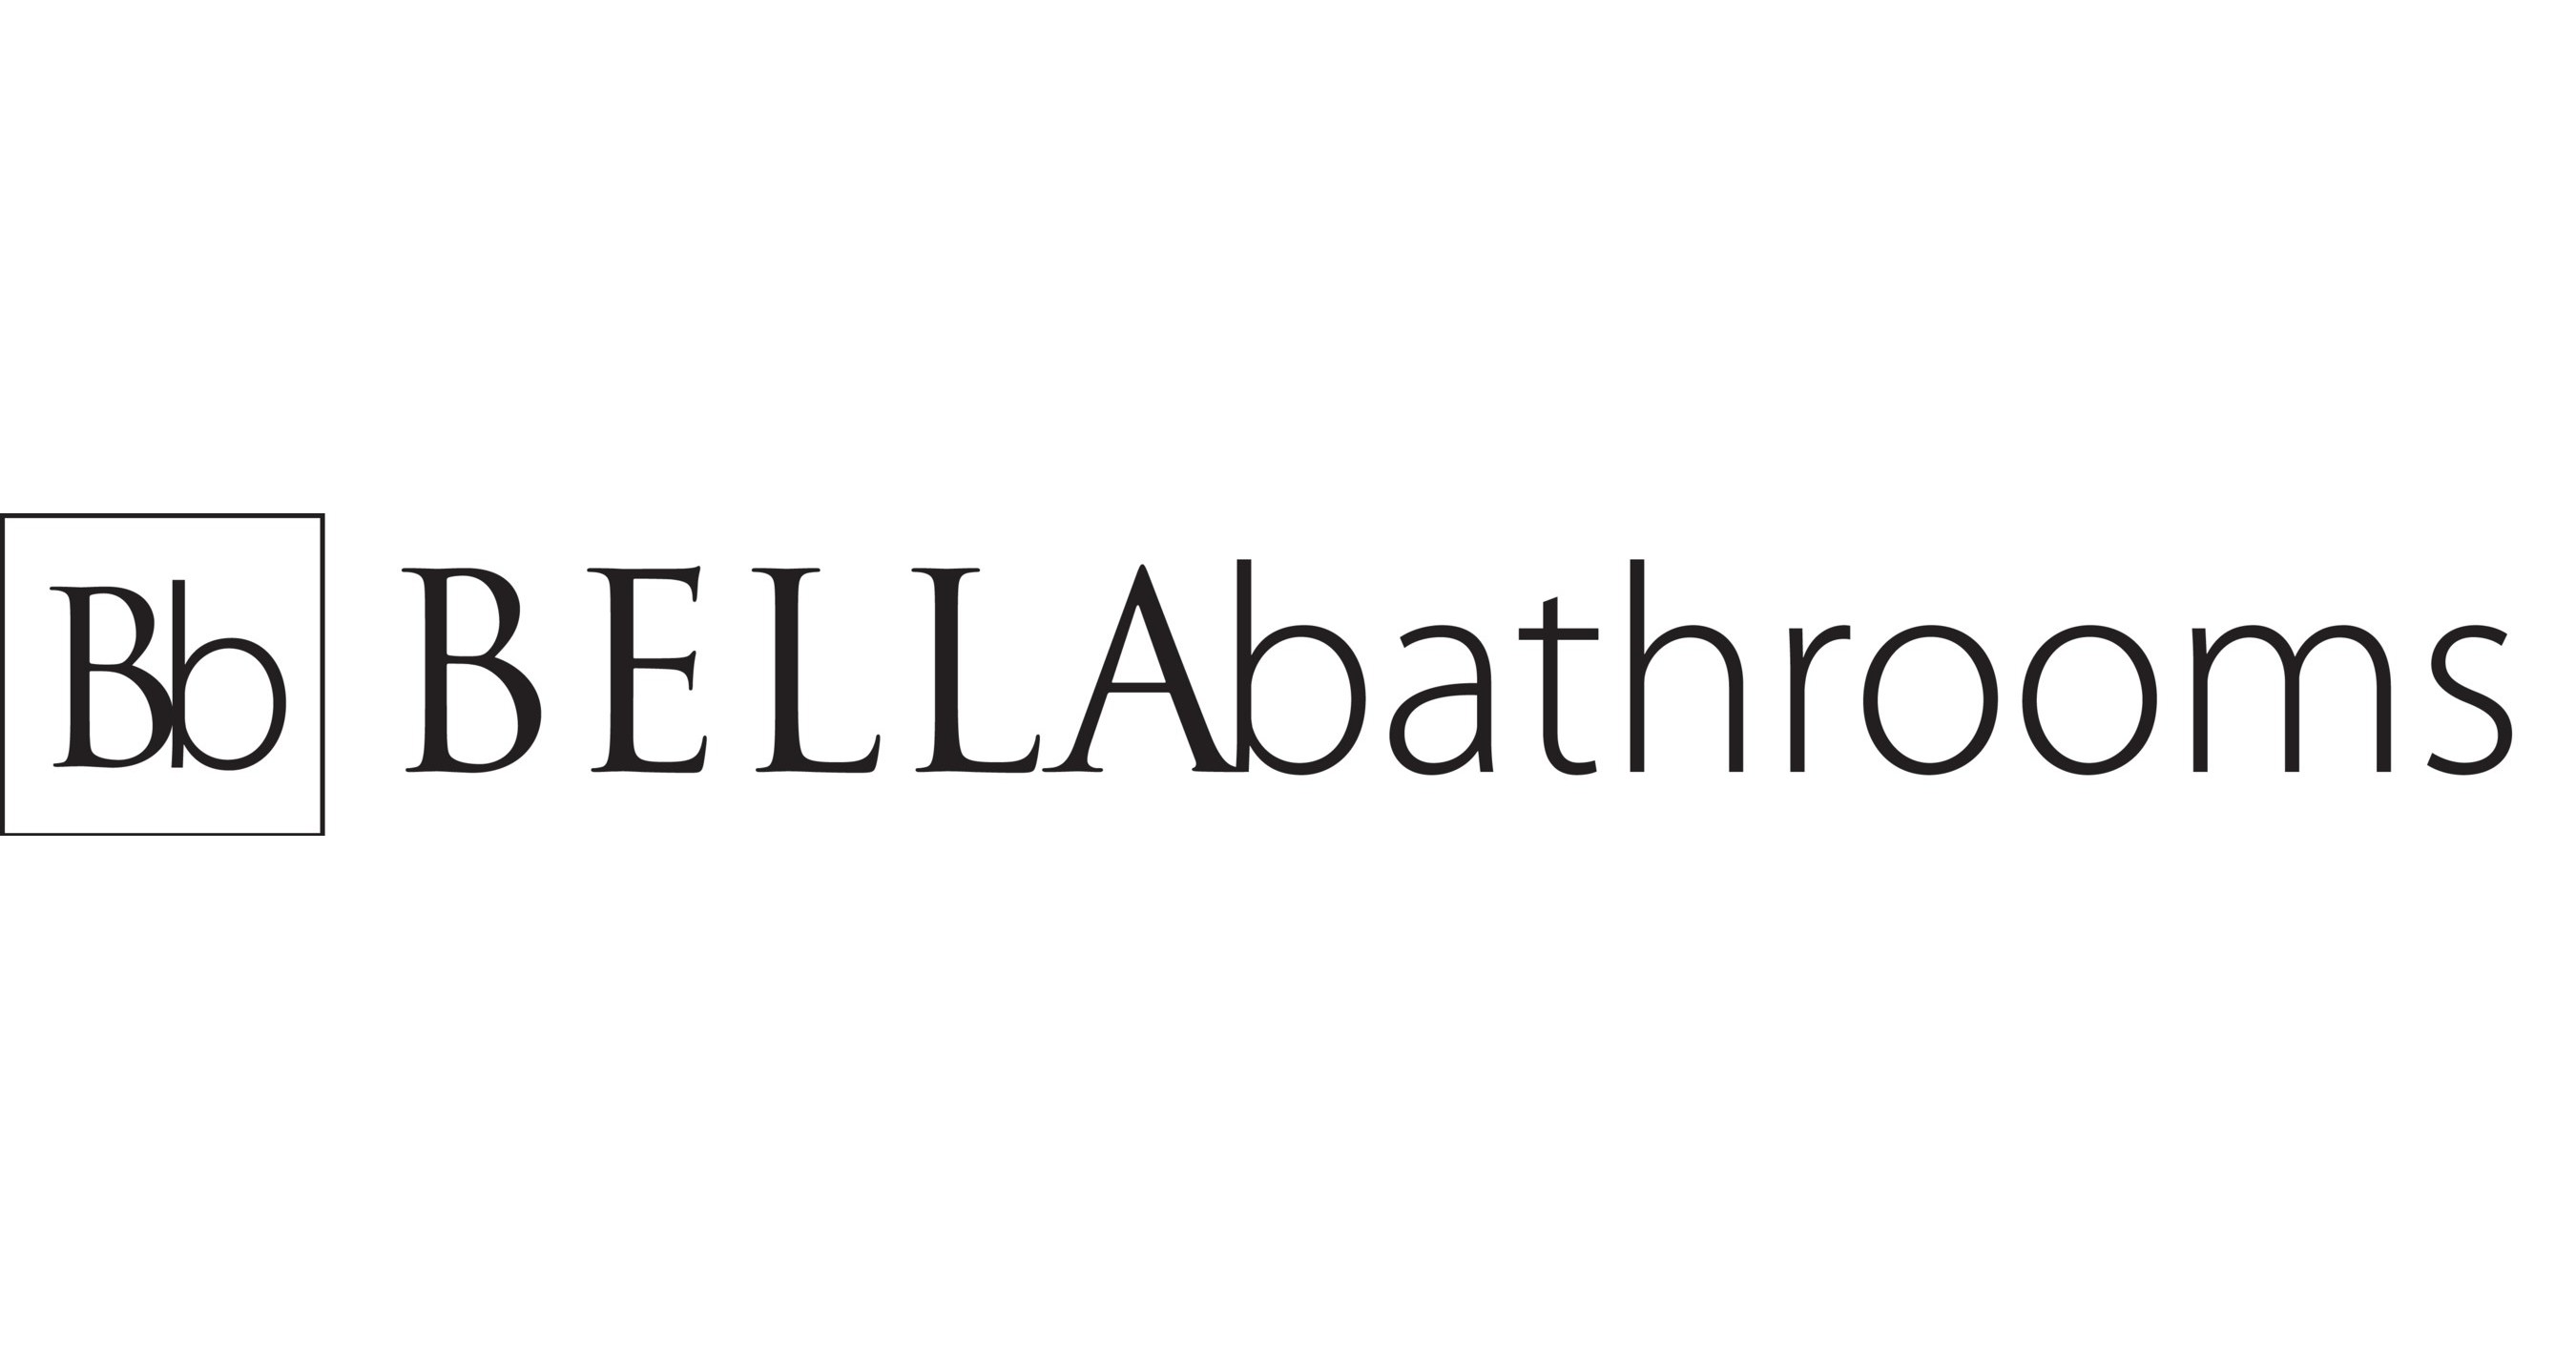 Bella Bathrooms Creates Stunning Yet Affordable Bathrooms with Designs to Suit Any Space